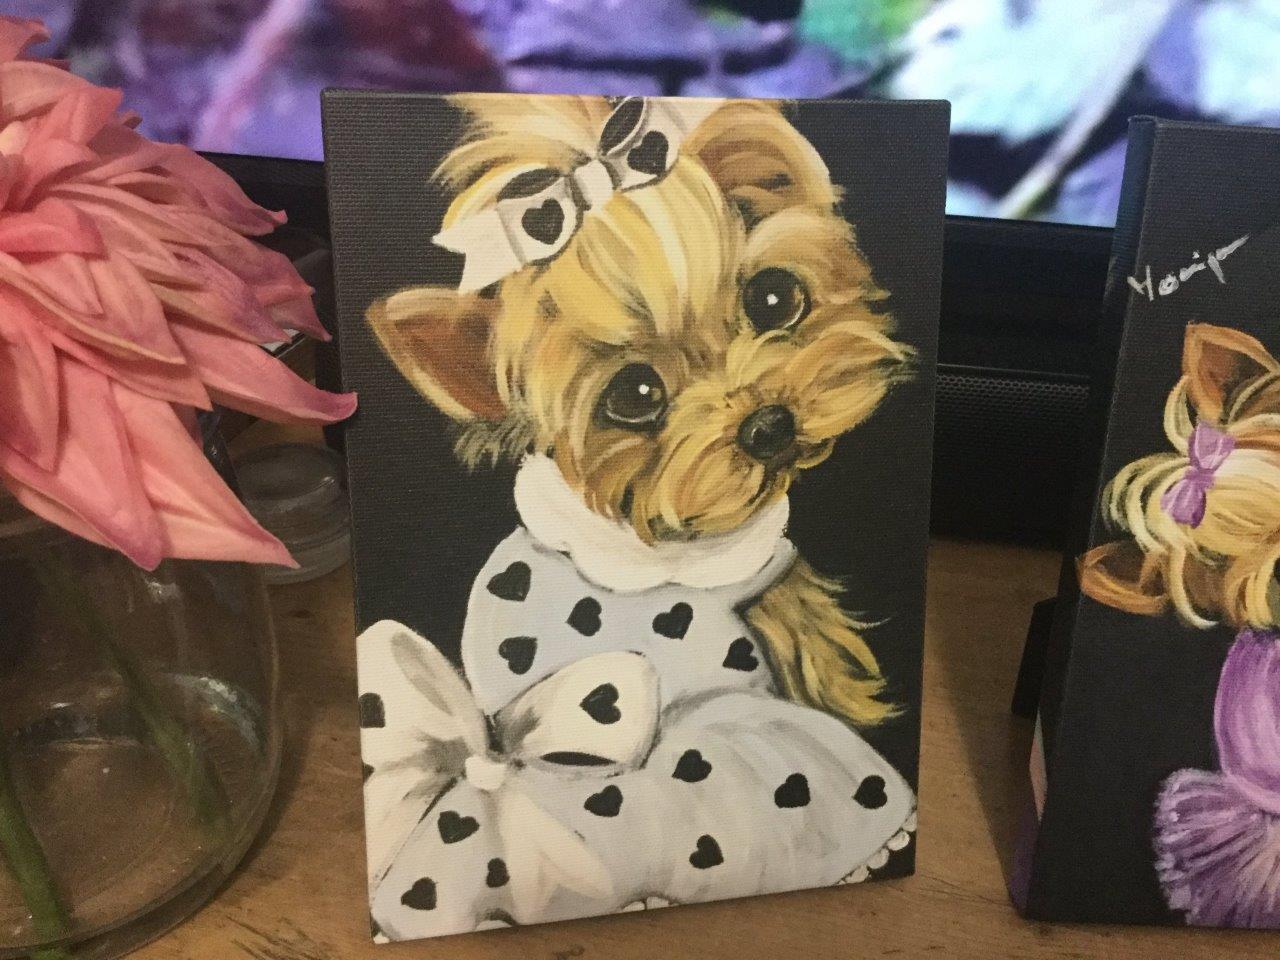 SWEET ADORABLE YORKIE IN A DRESS PRINTED FROM ORIGINAL PAINTING